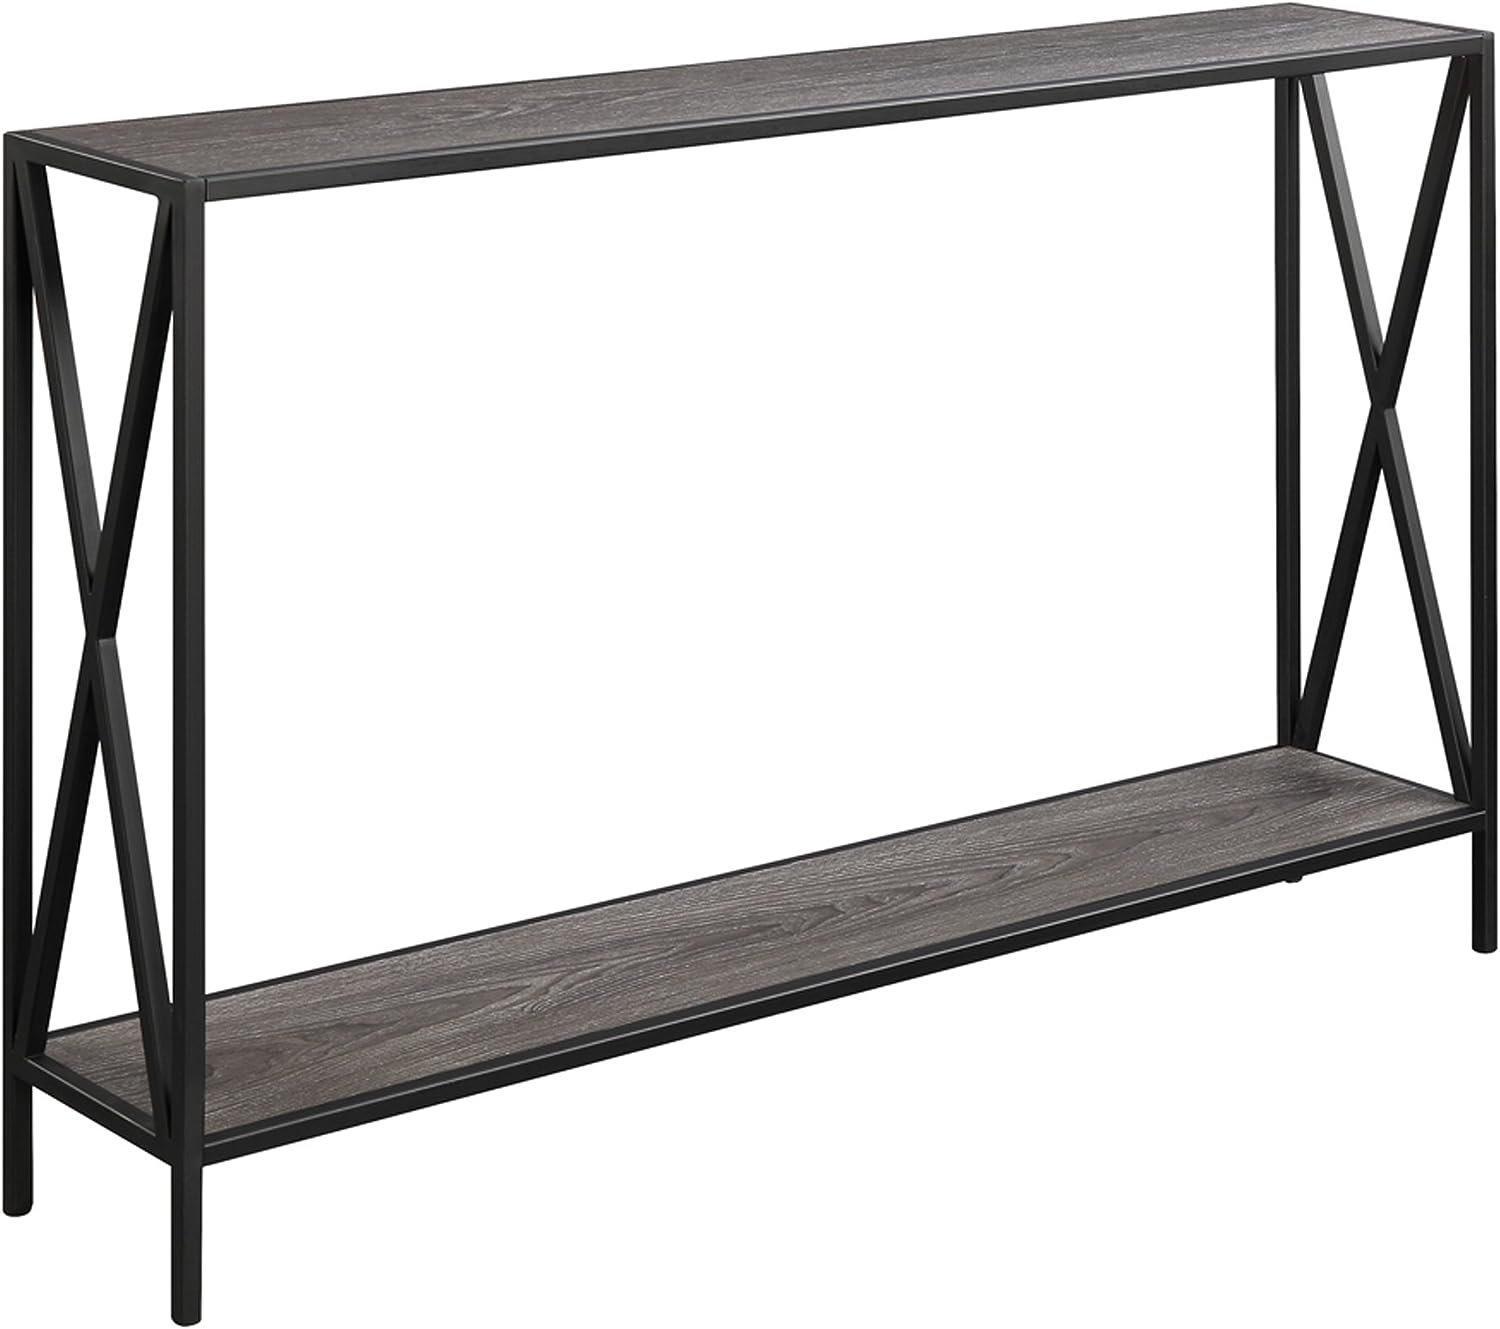 Convenience Concepts Console Table w/ Tucson Shelf (Weathered Gray/Black) $39.98